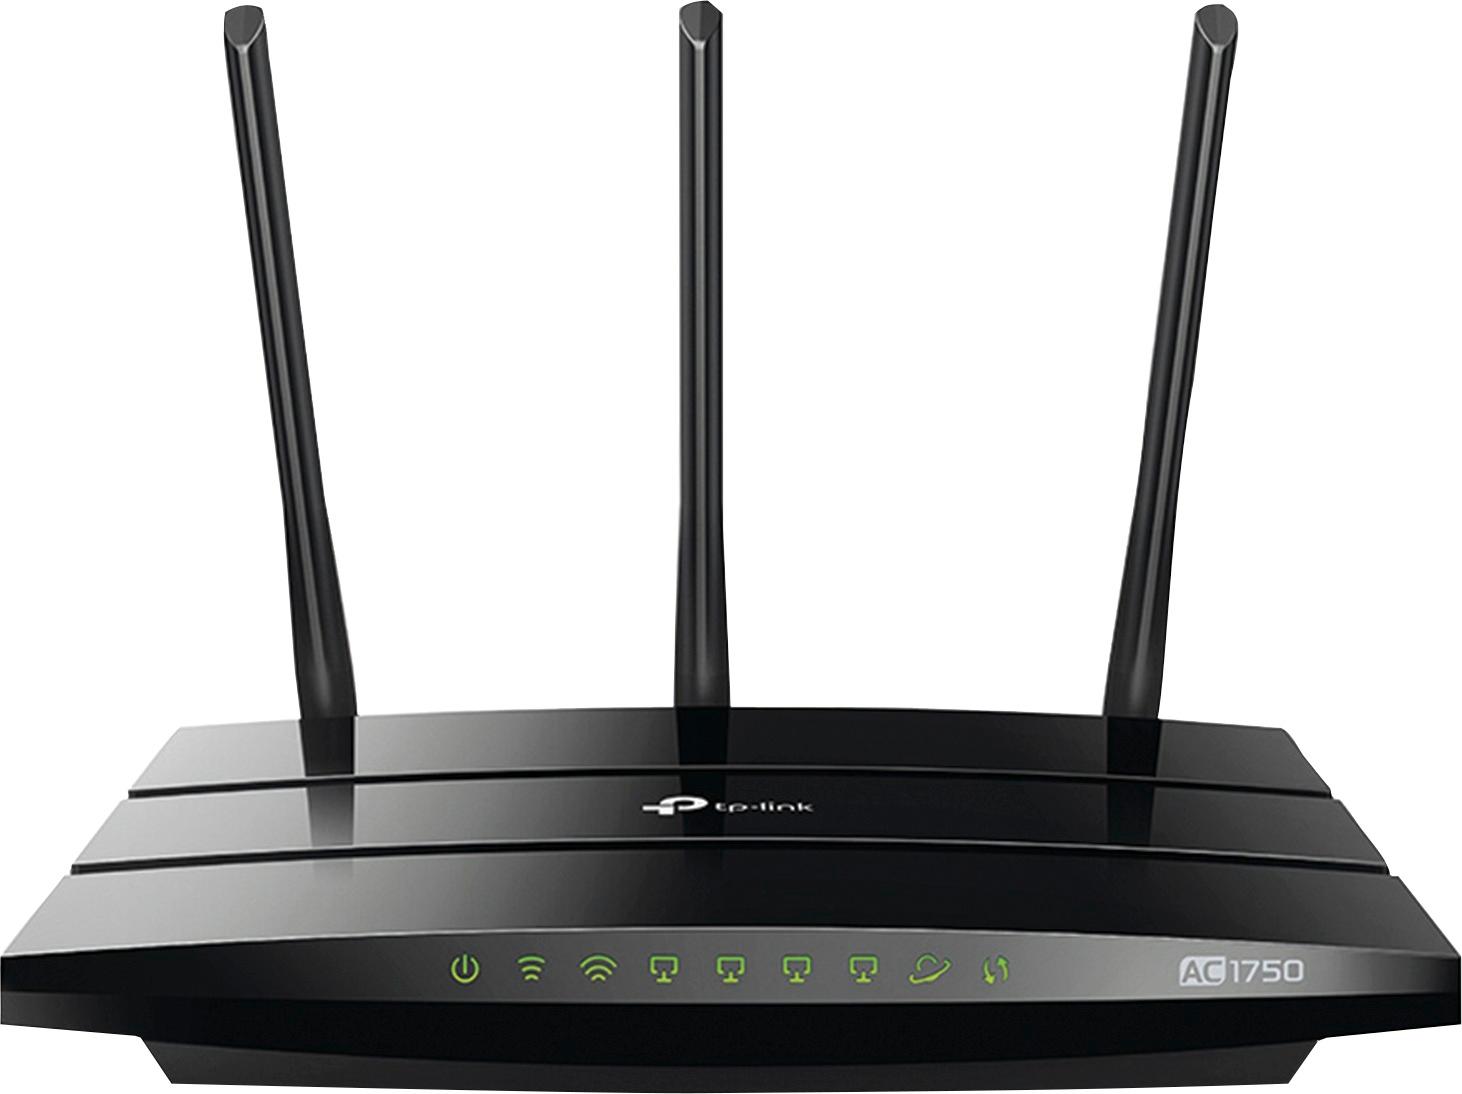 TP-Link – Archer AC1750 Dual-Band Wi-Fi 5 Router – Black